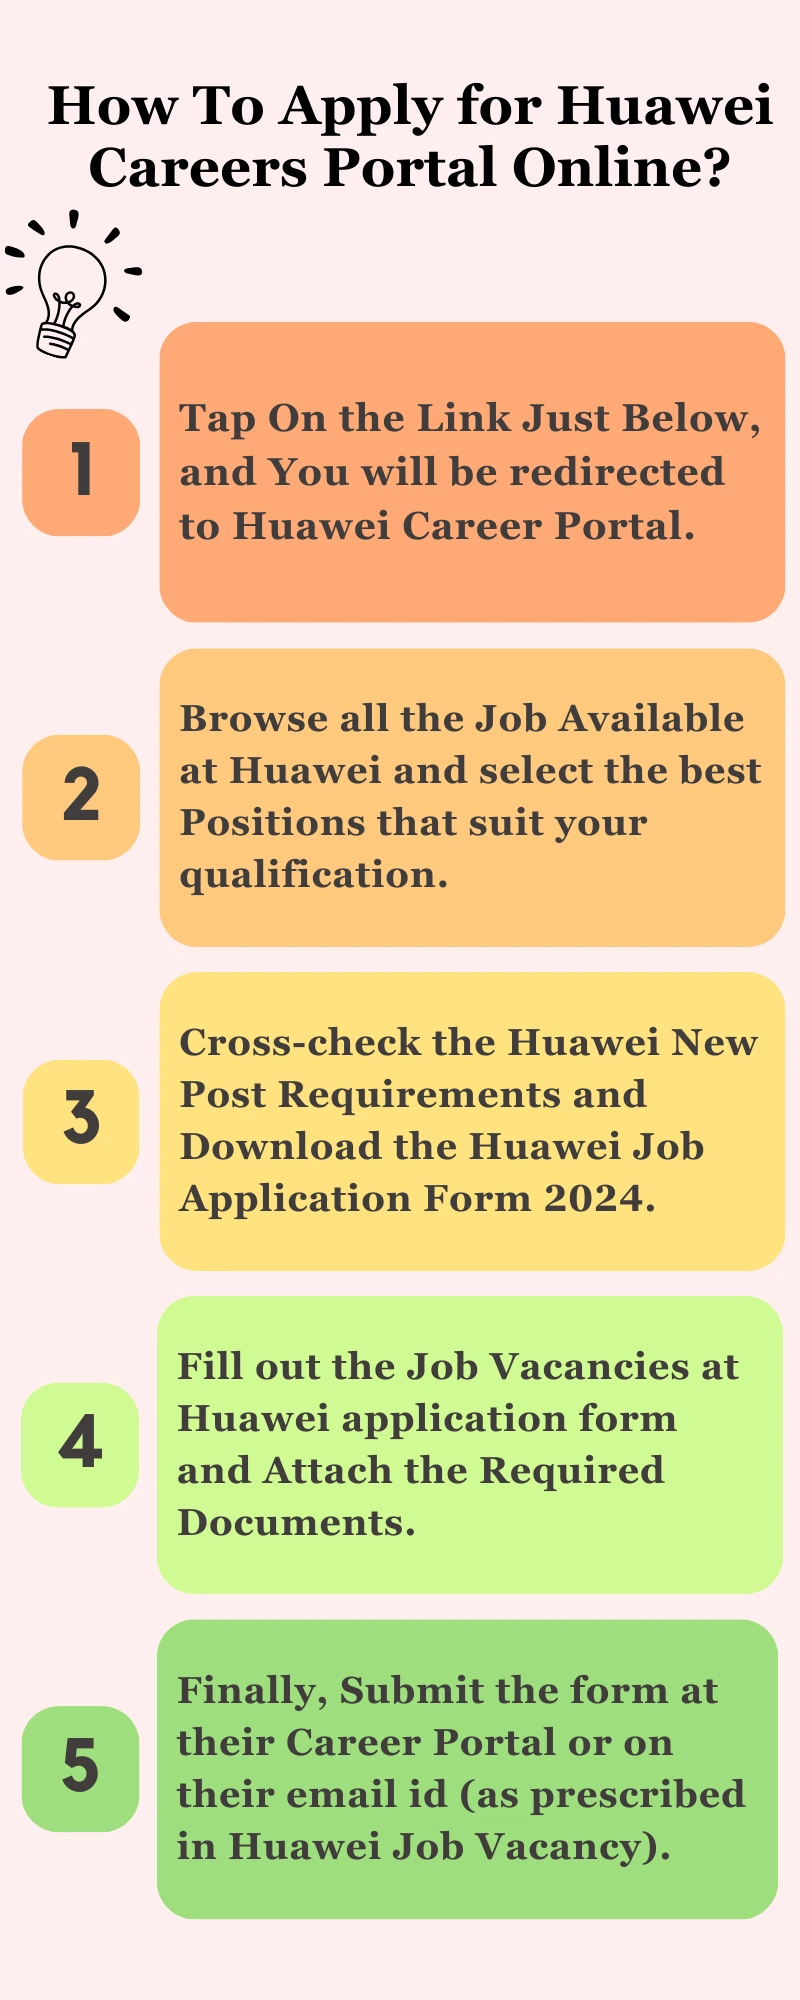 How To Apply for Huawei Careers Portal Online?